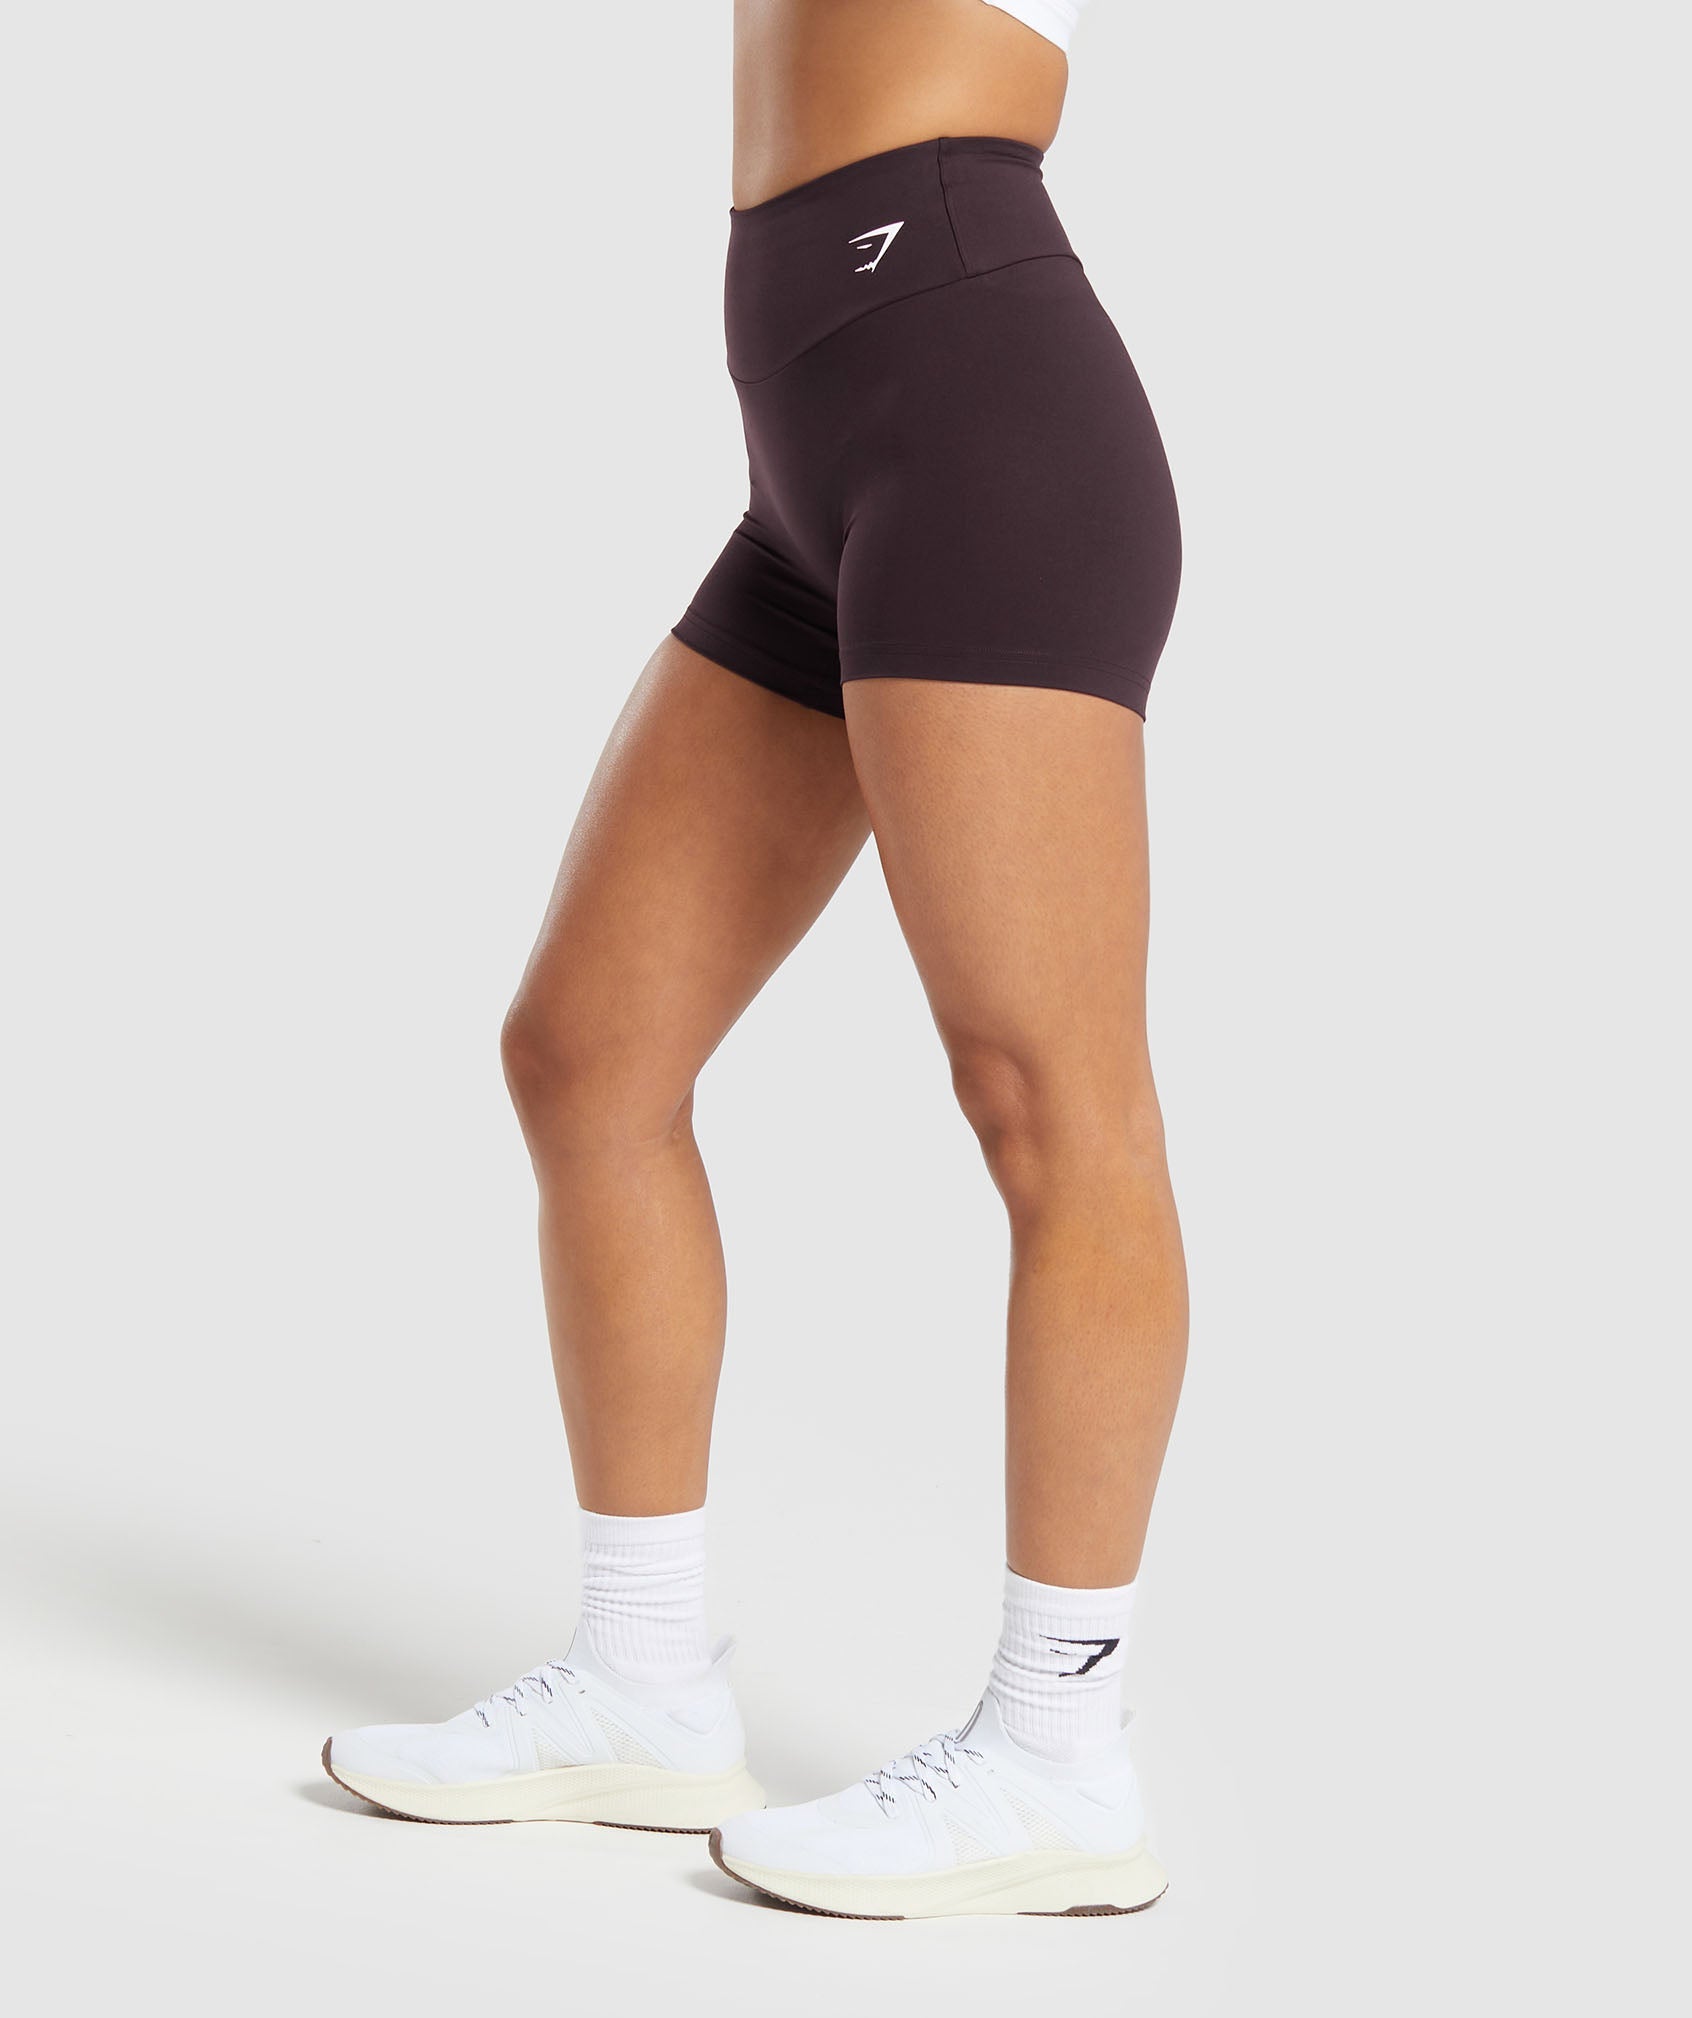 Training Tight Shorts in Plum Brown - view 3